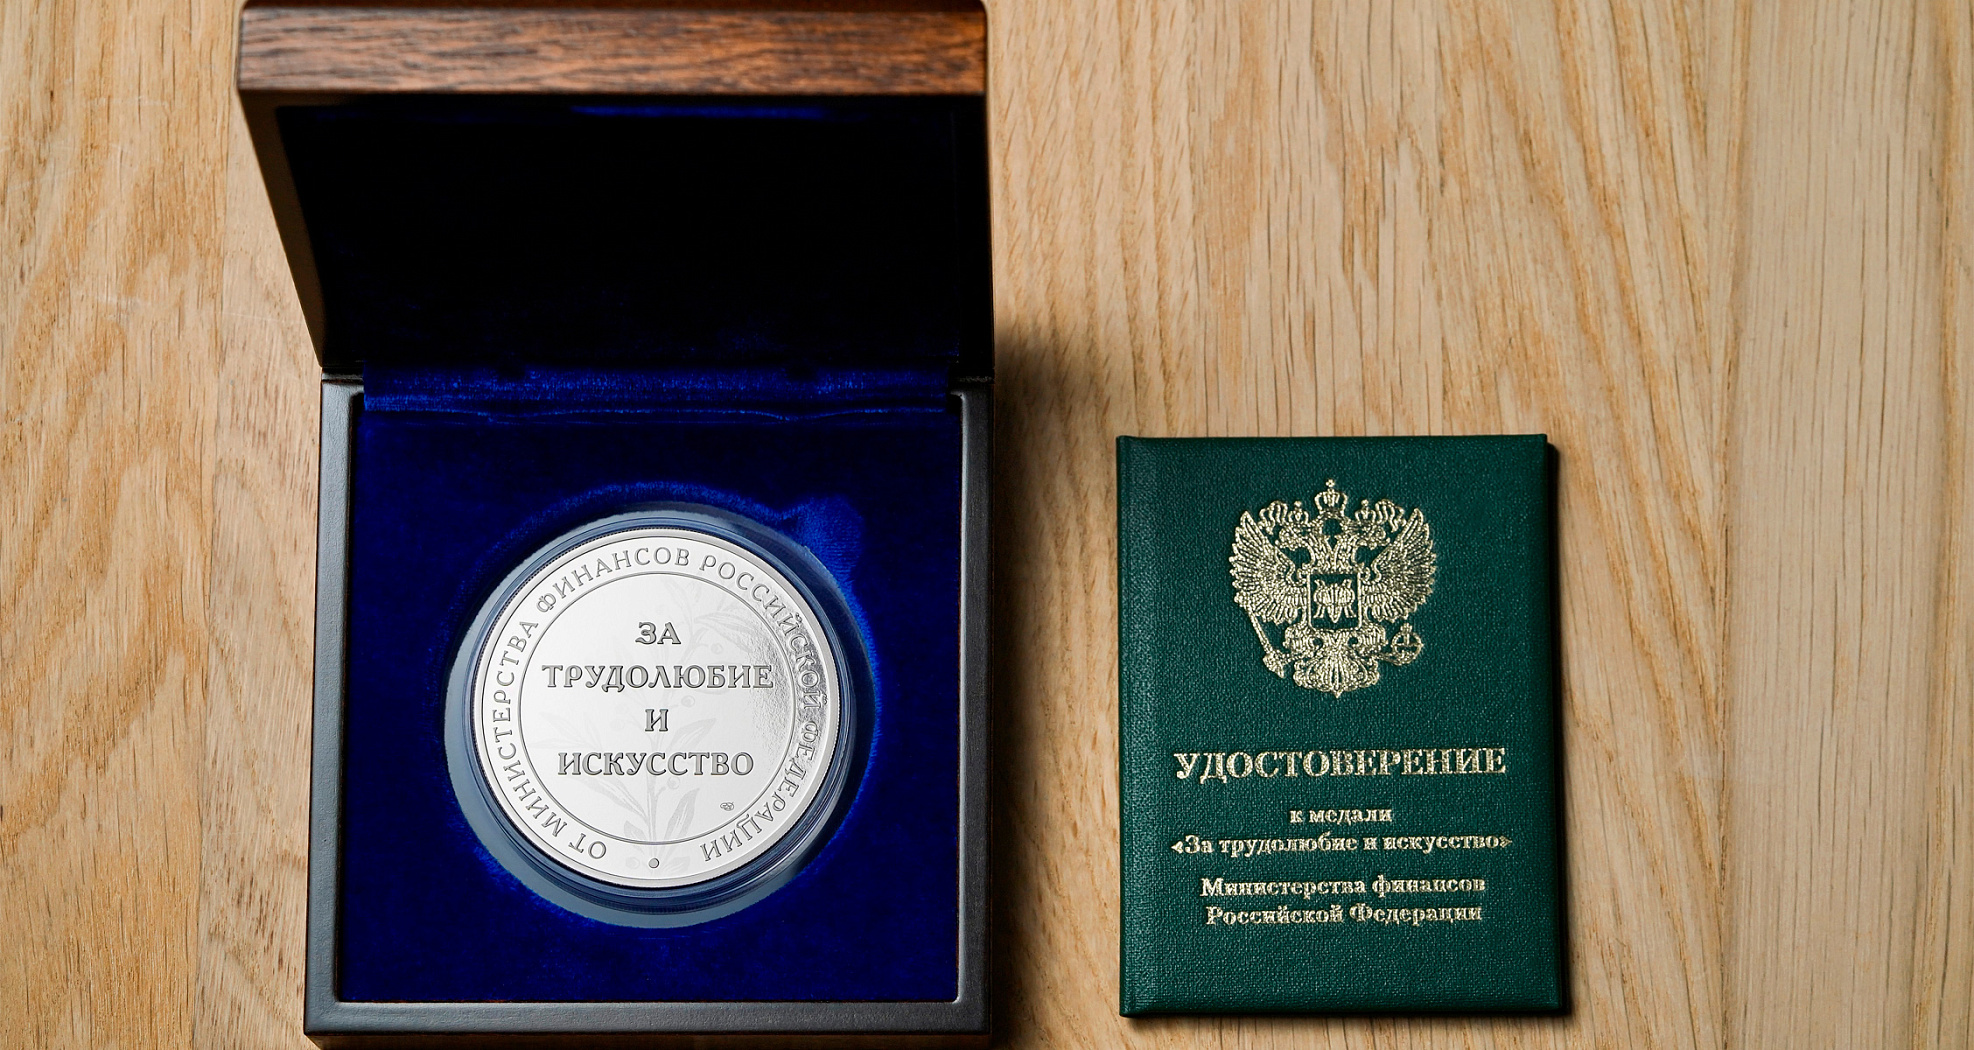 Konstantin Chaykin has been awarded with the Medal &quot;For Diligence and Art&quot;